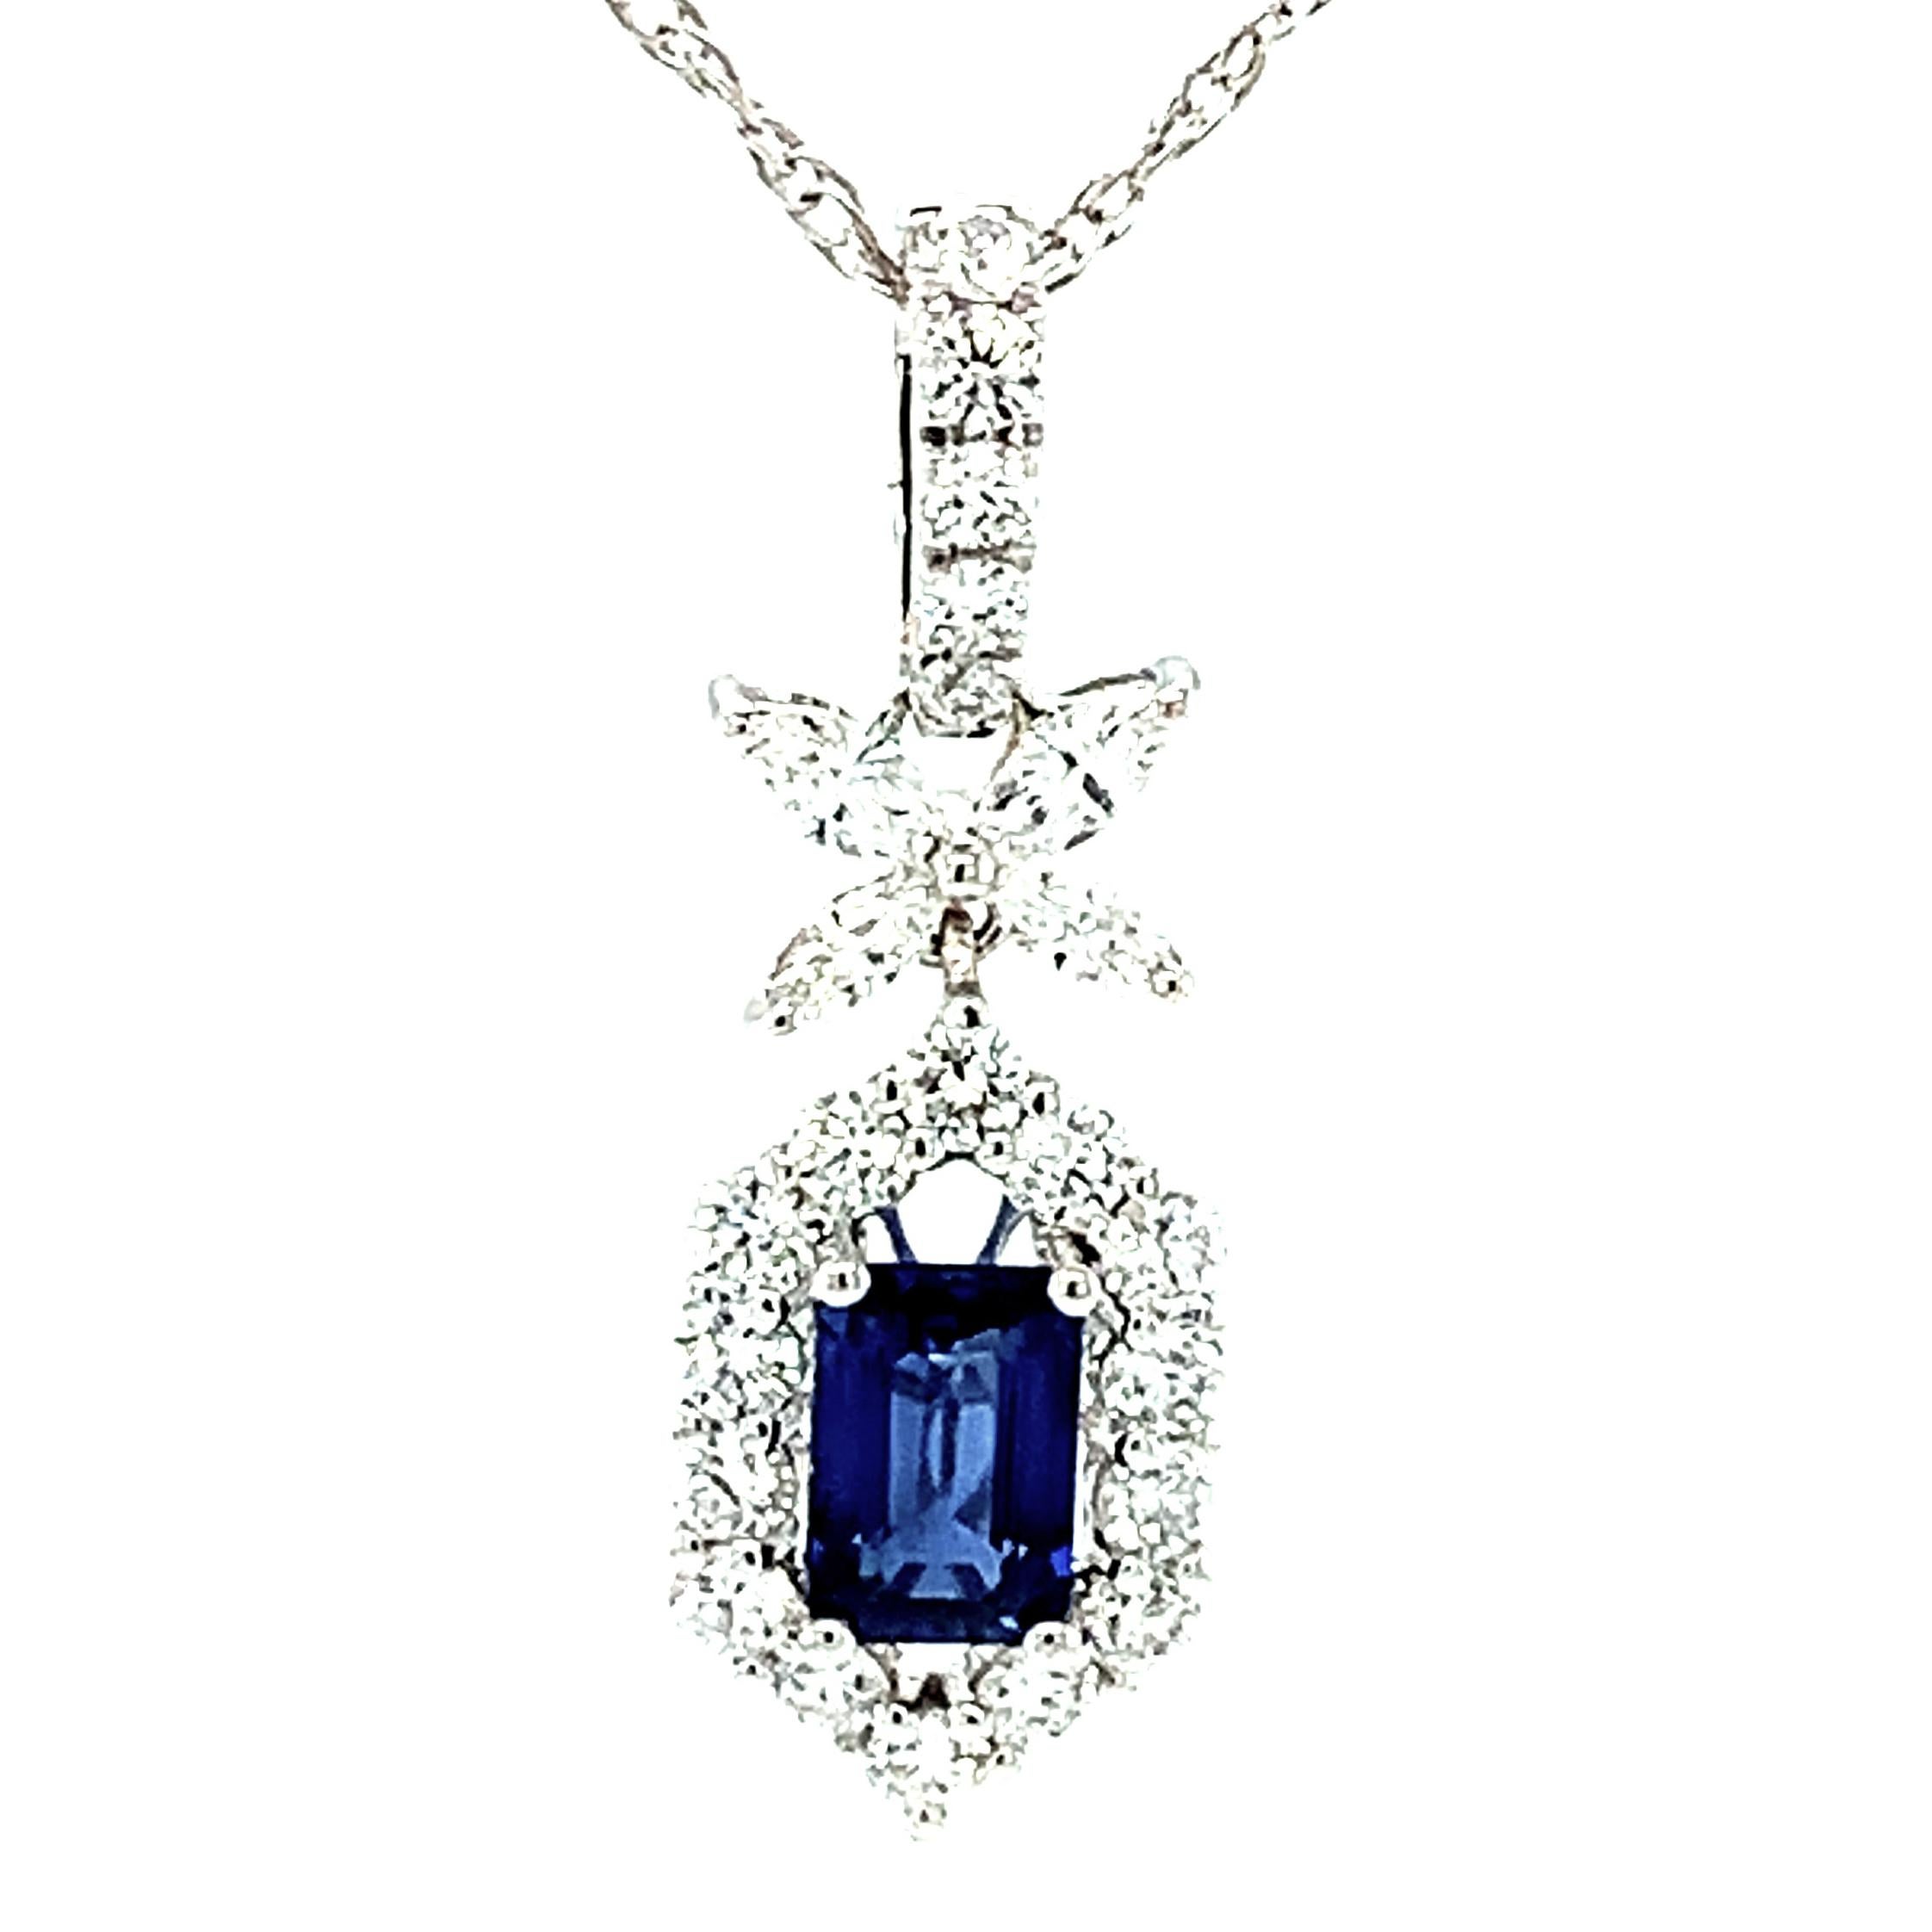 This elegant blue sapphire and diamond necklace features a .61 carat emerald cut gem blue sapphire framed by scintillating white diamonds in a stylish 18k white gold hexagonal design. The sapphire is clean and bright, with wonderfully rich blue